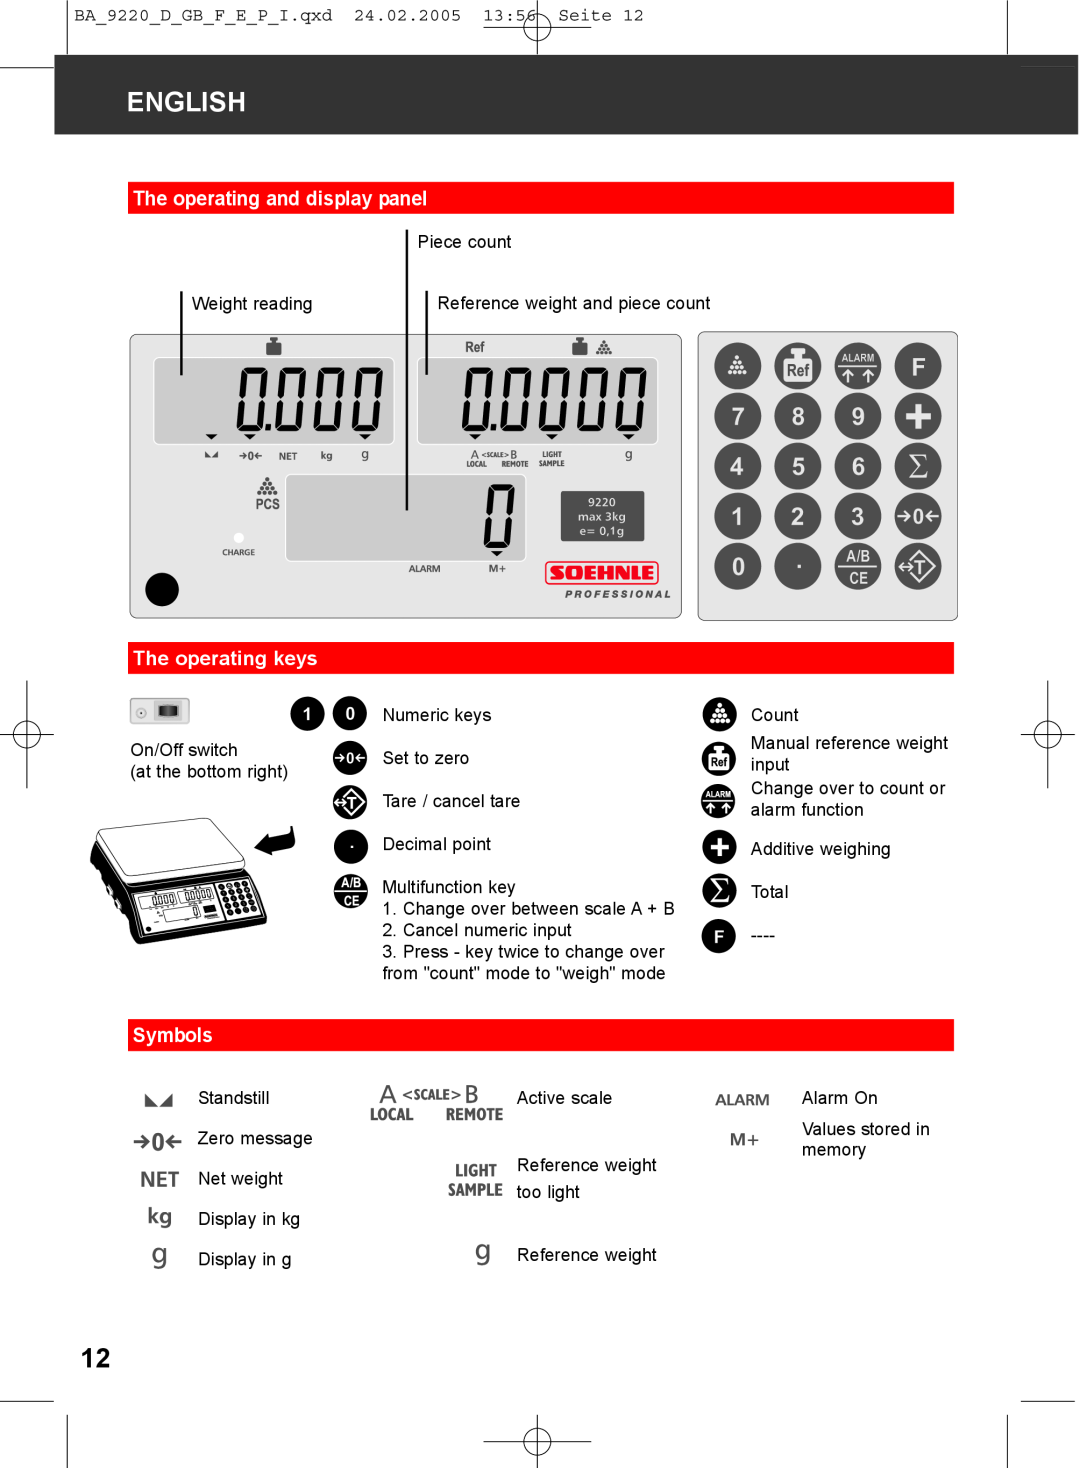 Soehnle 9220 manual The operating and display panel, The operating keys, Symbols, English, Reference weight and piece count 